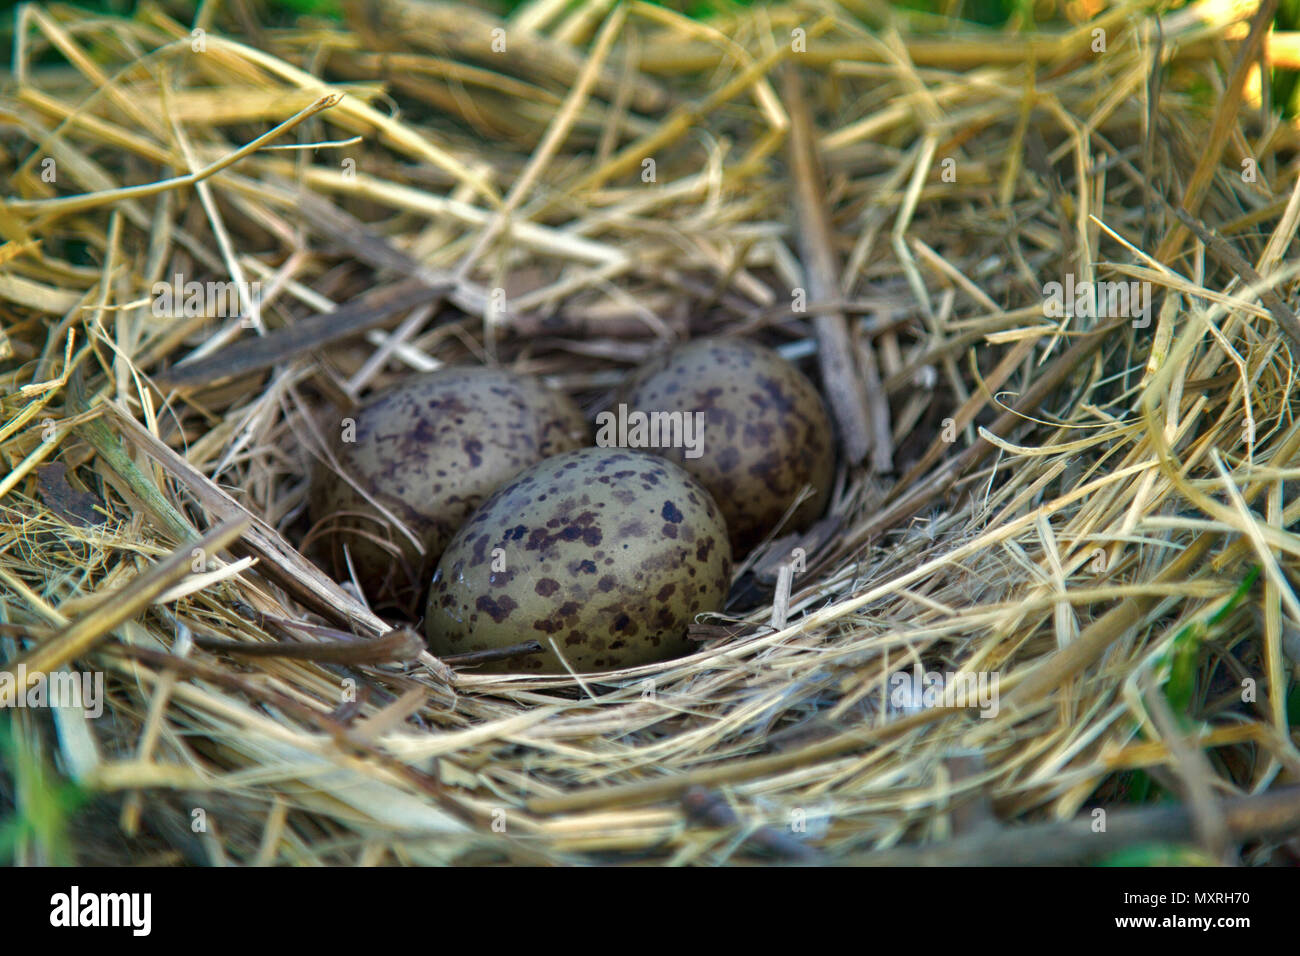 Nest of black-headed gulls with typical clutch of eggs. Three speckled eggs are in nest made of dry grass, weave a nest. Reproduction of birds, nestli Stock Photo